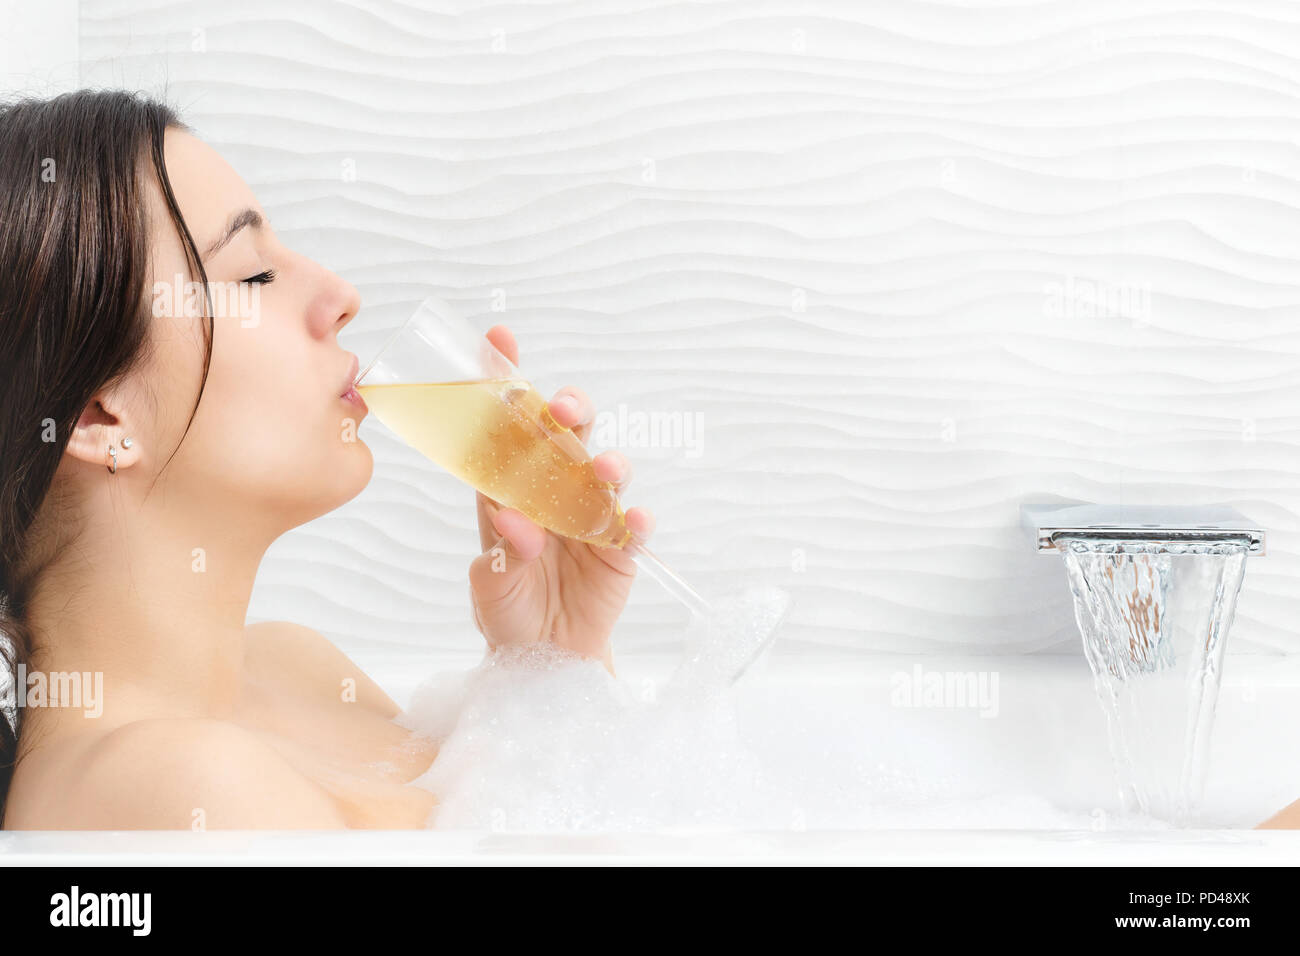 Close up portrait of young woman relaxing in foam bath drinking champagne. Stock Photo